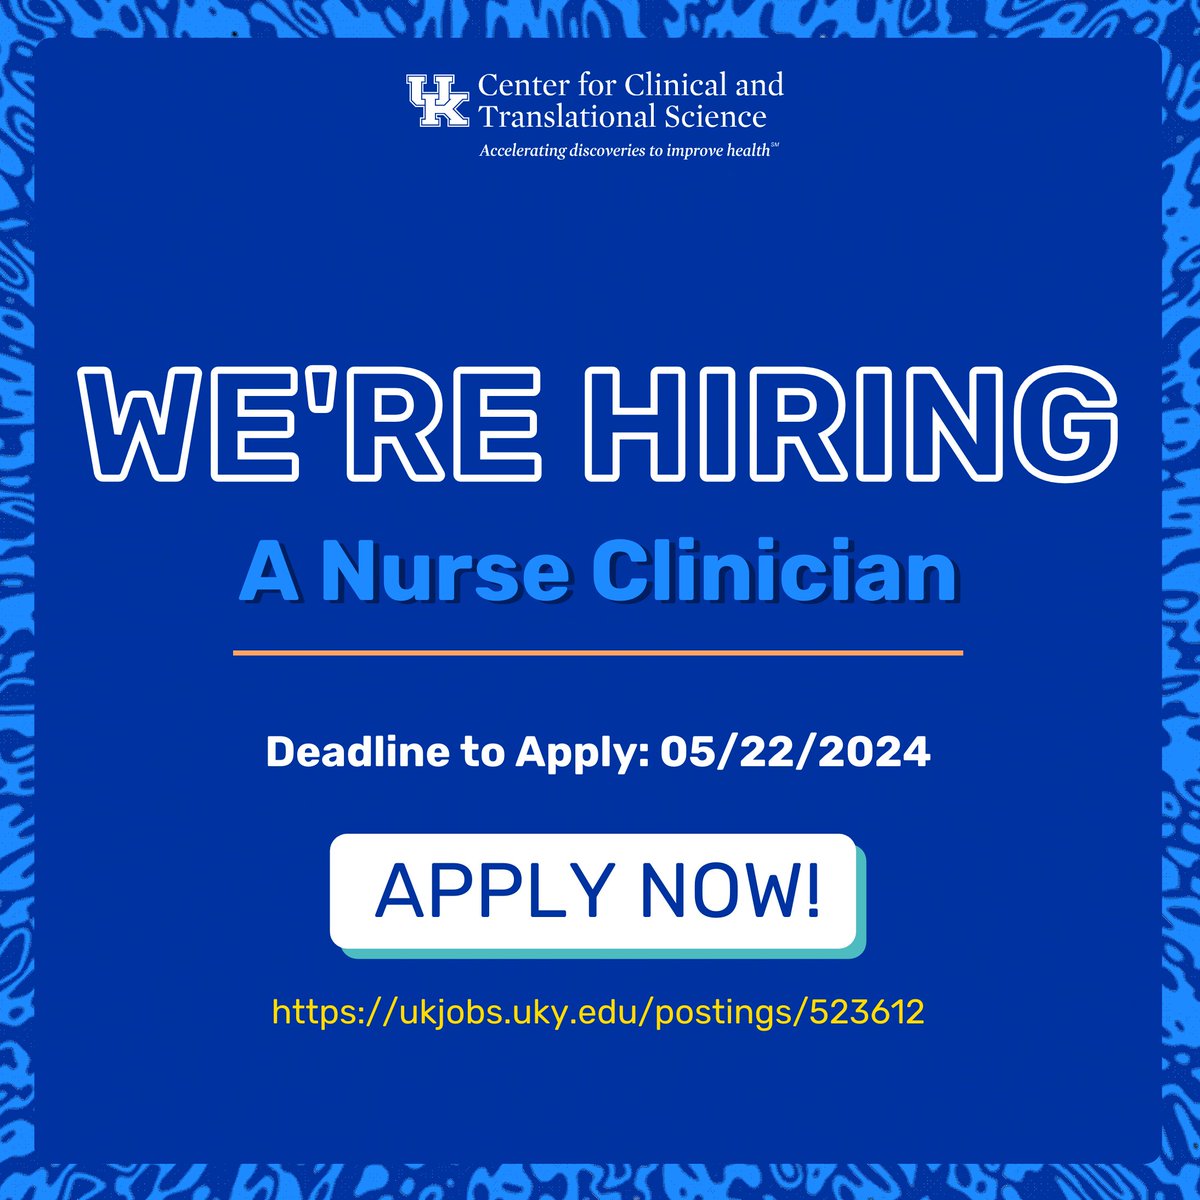 📣We are currently seeking a dynamic Nurse Clinician to join our fast-paced research center at the University of Kentucky in Lexington. 🗓️ Deadline to apply: 05/22/2024 To learn more or to apply click here: ukjobs.uky.edu/postings/523612